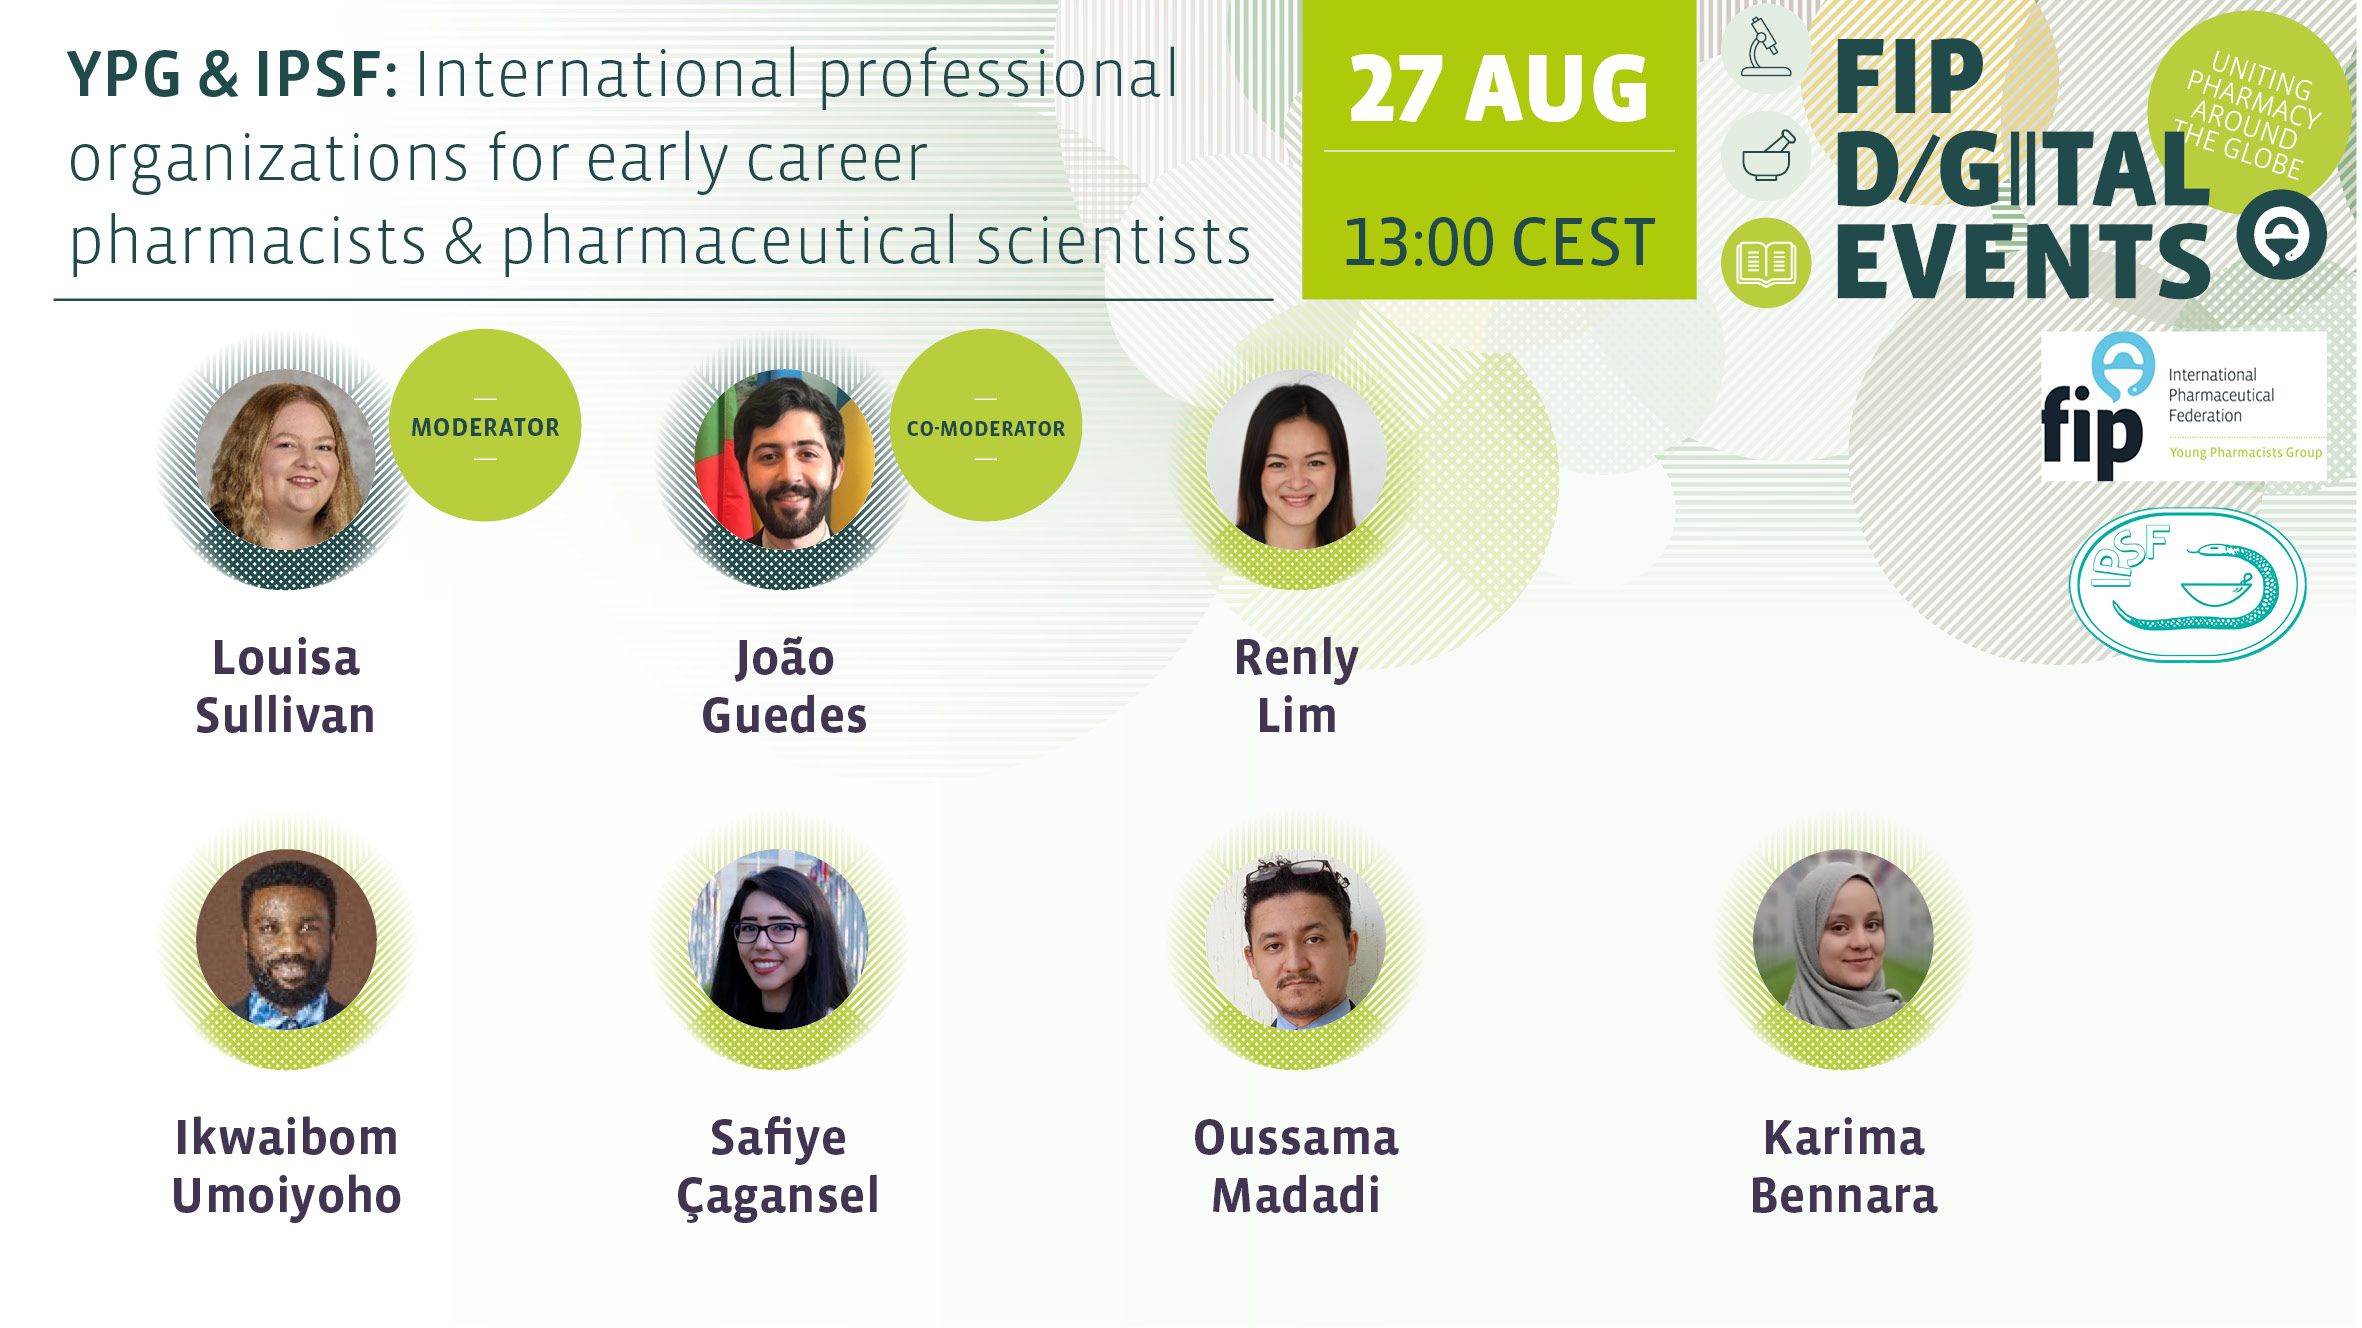 YPG & IPSF: International Professional Organizations for Early Career Pharmacists & Pharmaceutical Scientists Thumbnail